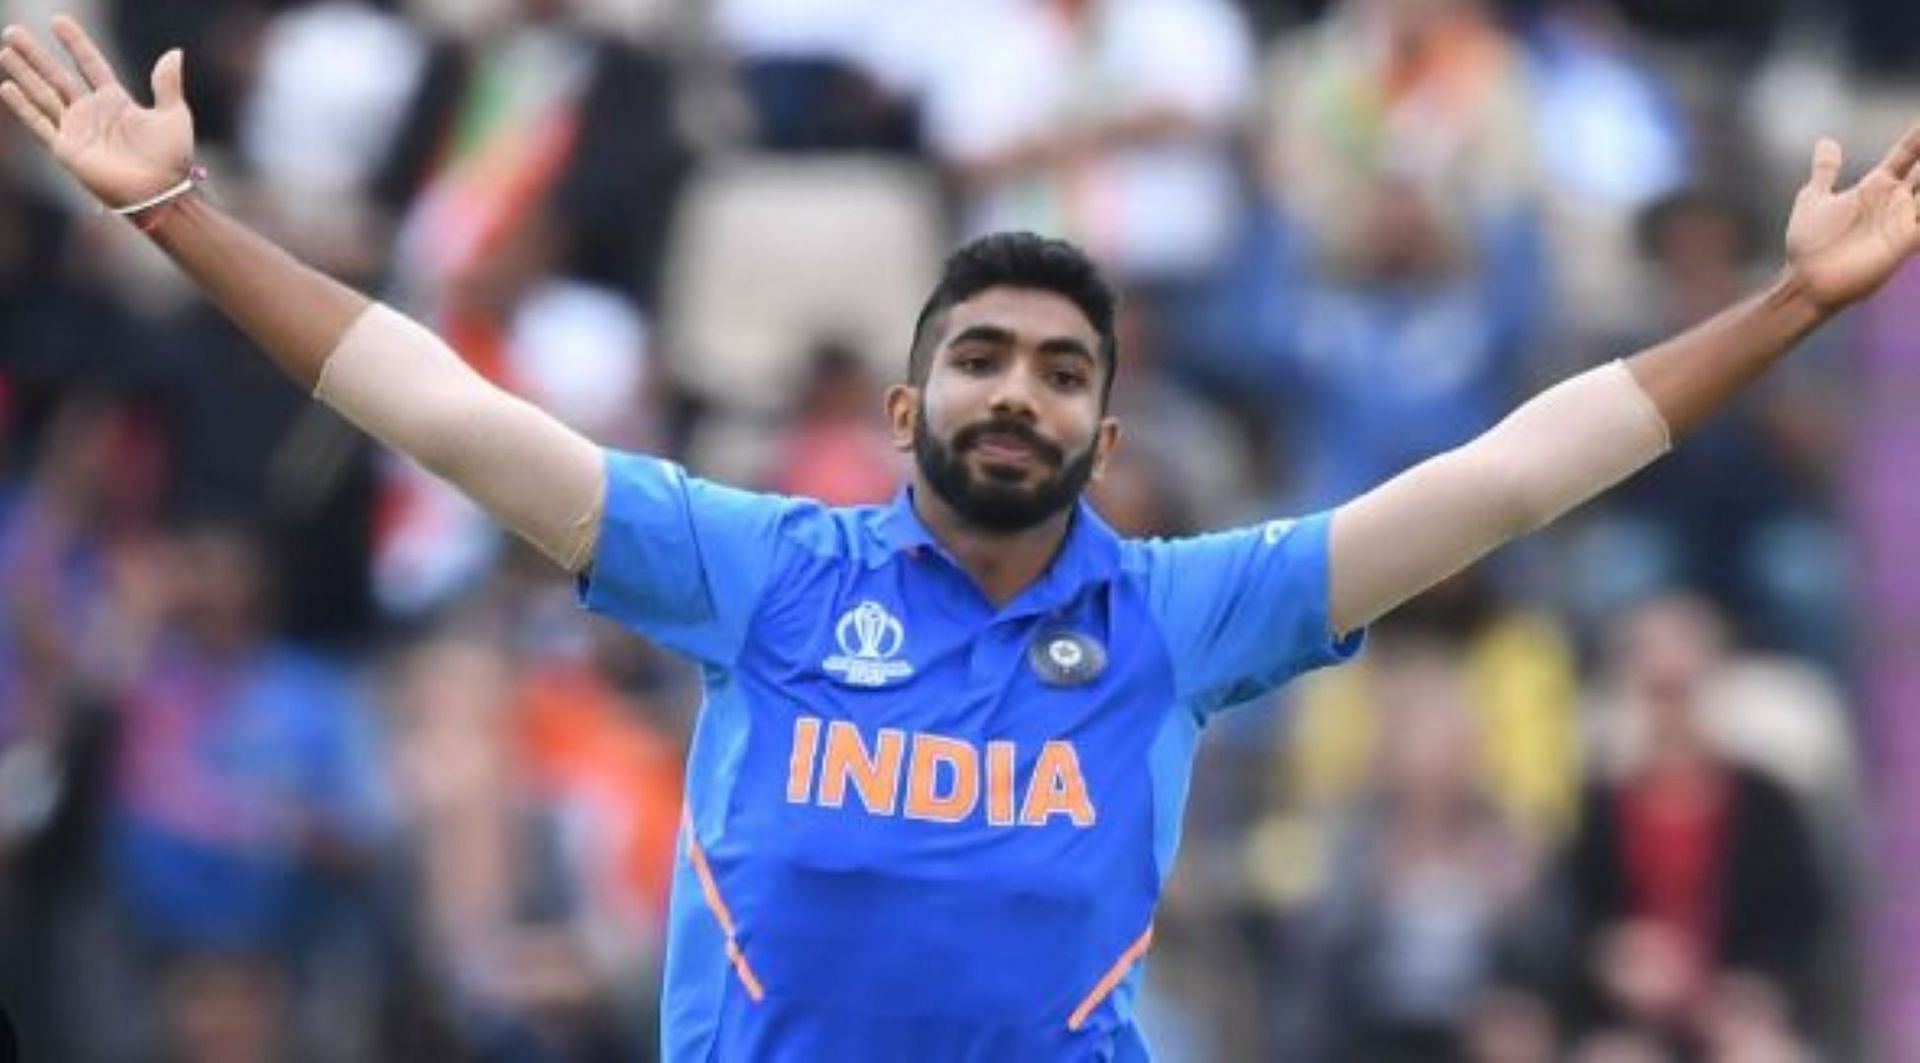 Bumrah will spearhead the Indian attack in the upcoming World Cup